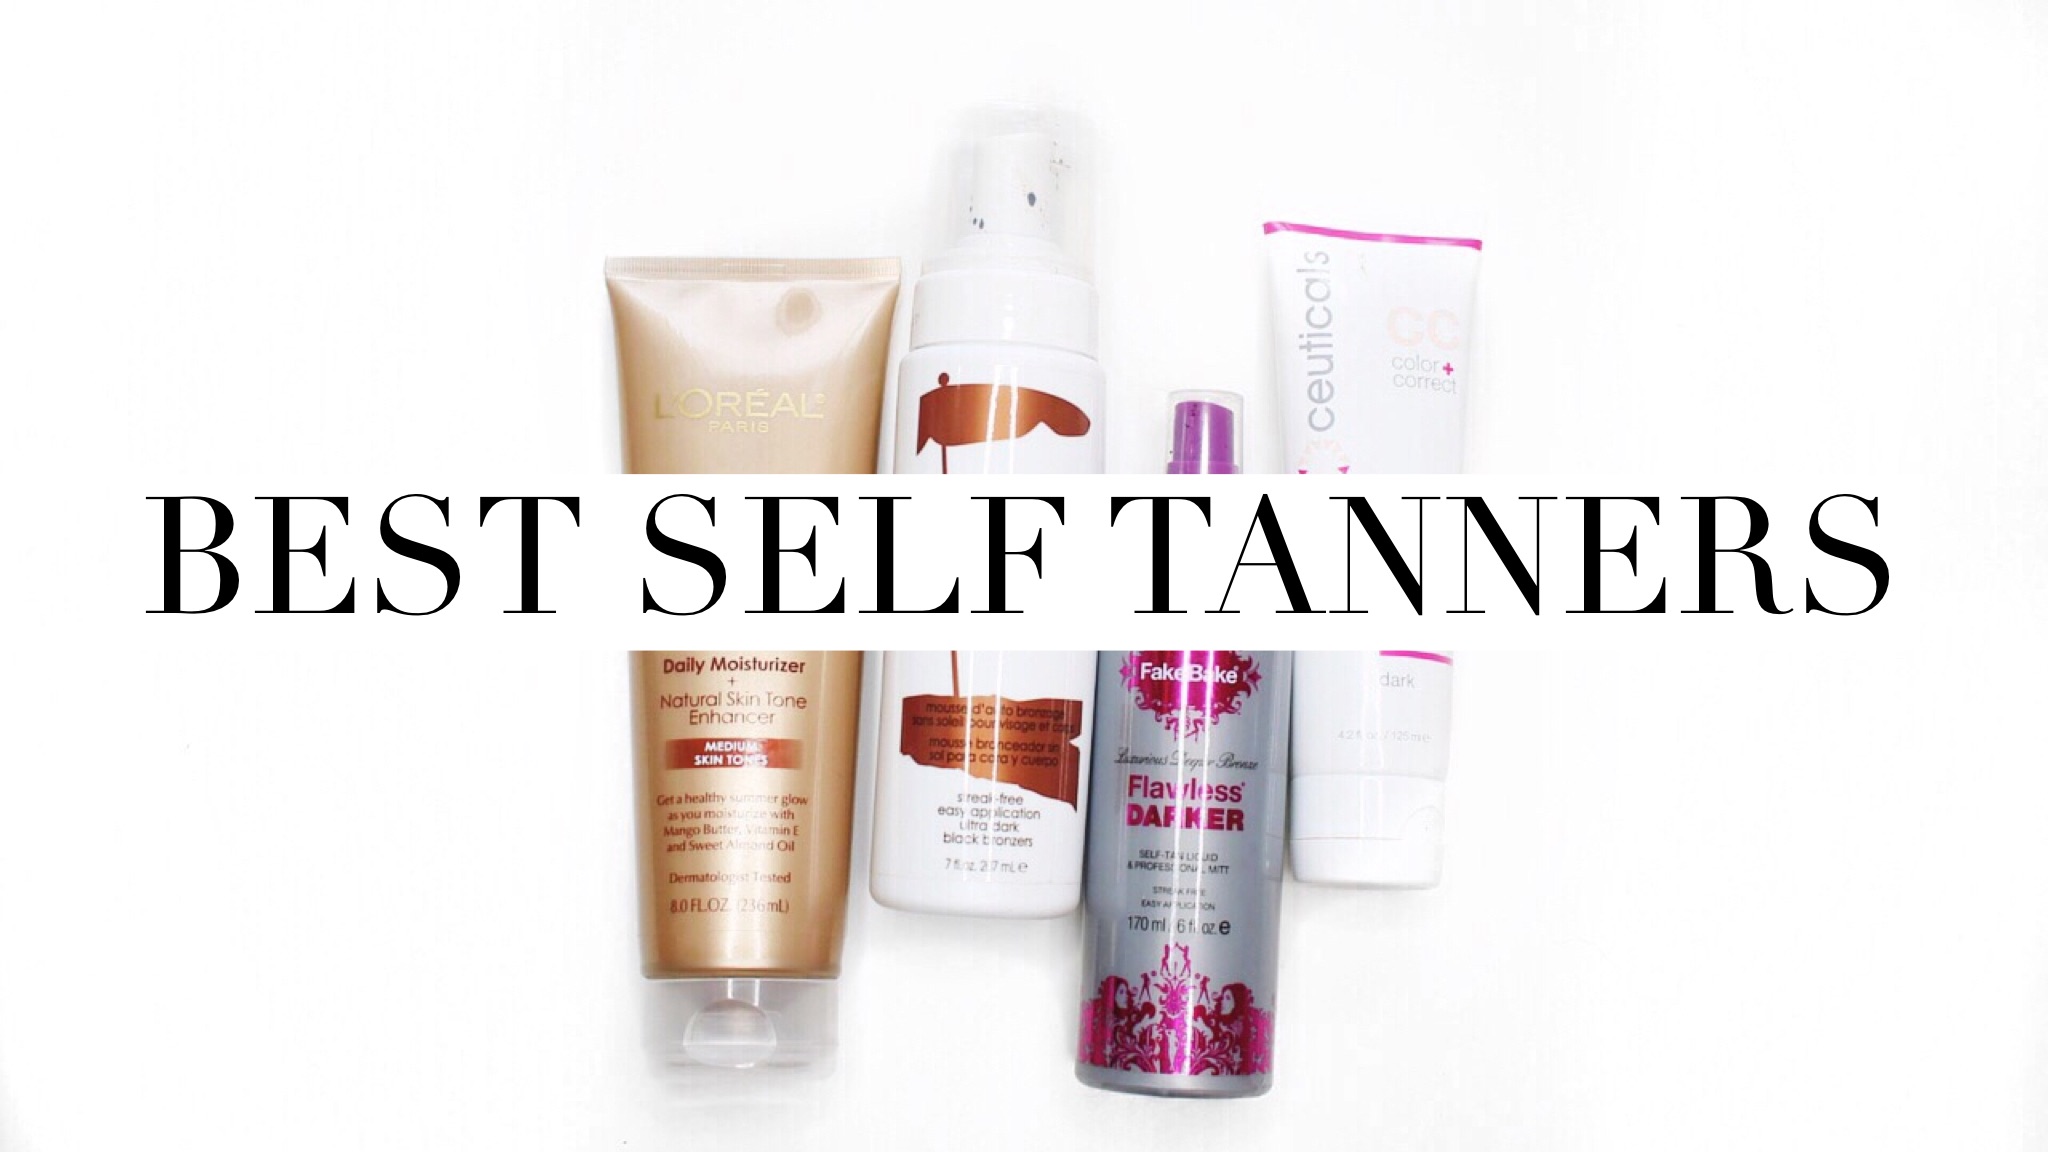 Best Self Tanners | Twinspiration